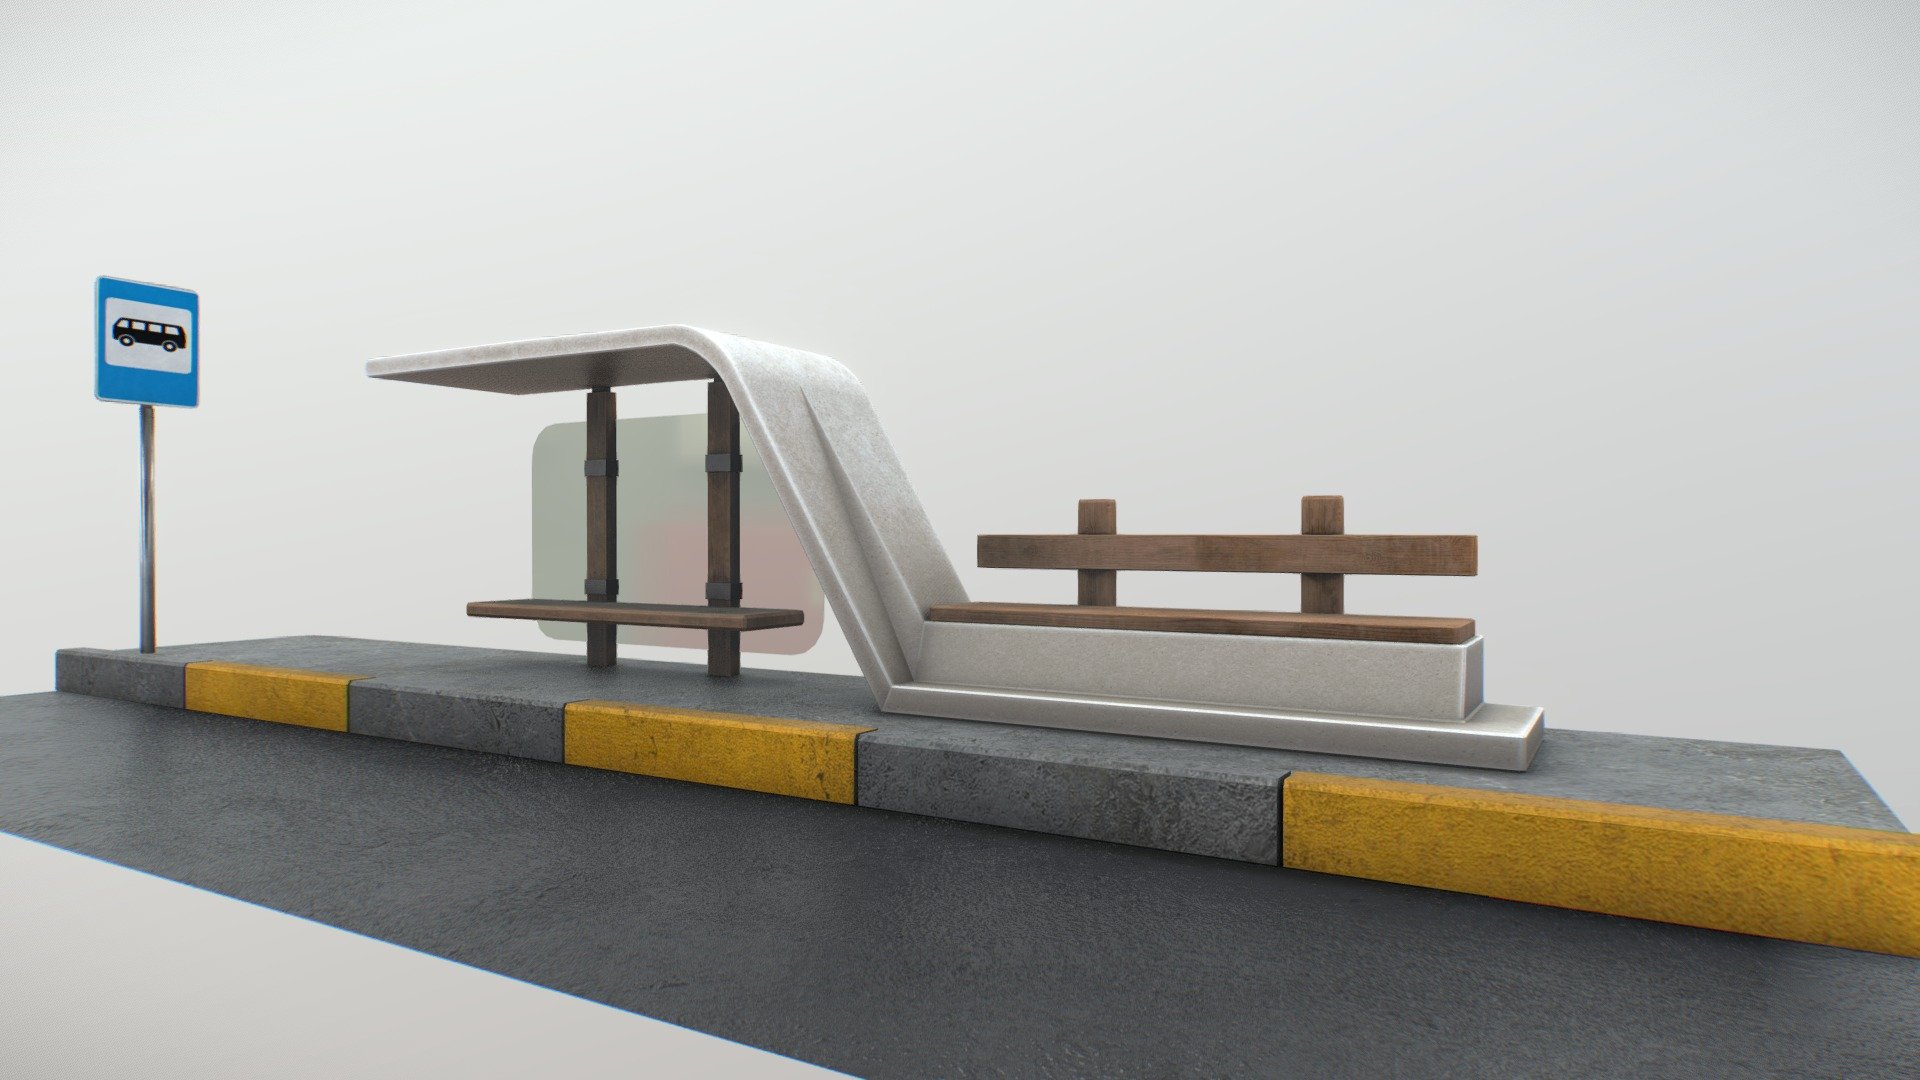 Concrete Busstop 2023
Blender + Substance painter

My wife's model - Concrete Busstop 2023 - Buy Royalty Free 3D model by VRA (@architect47) 3d model